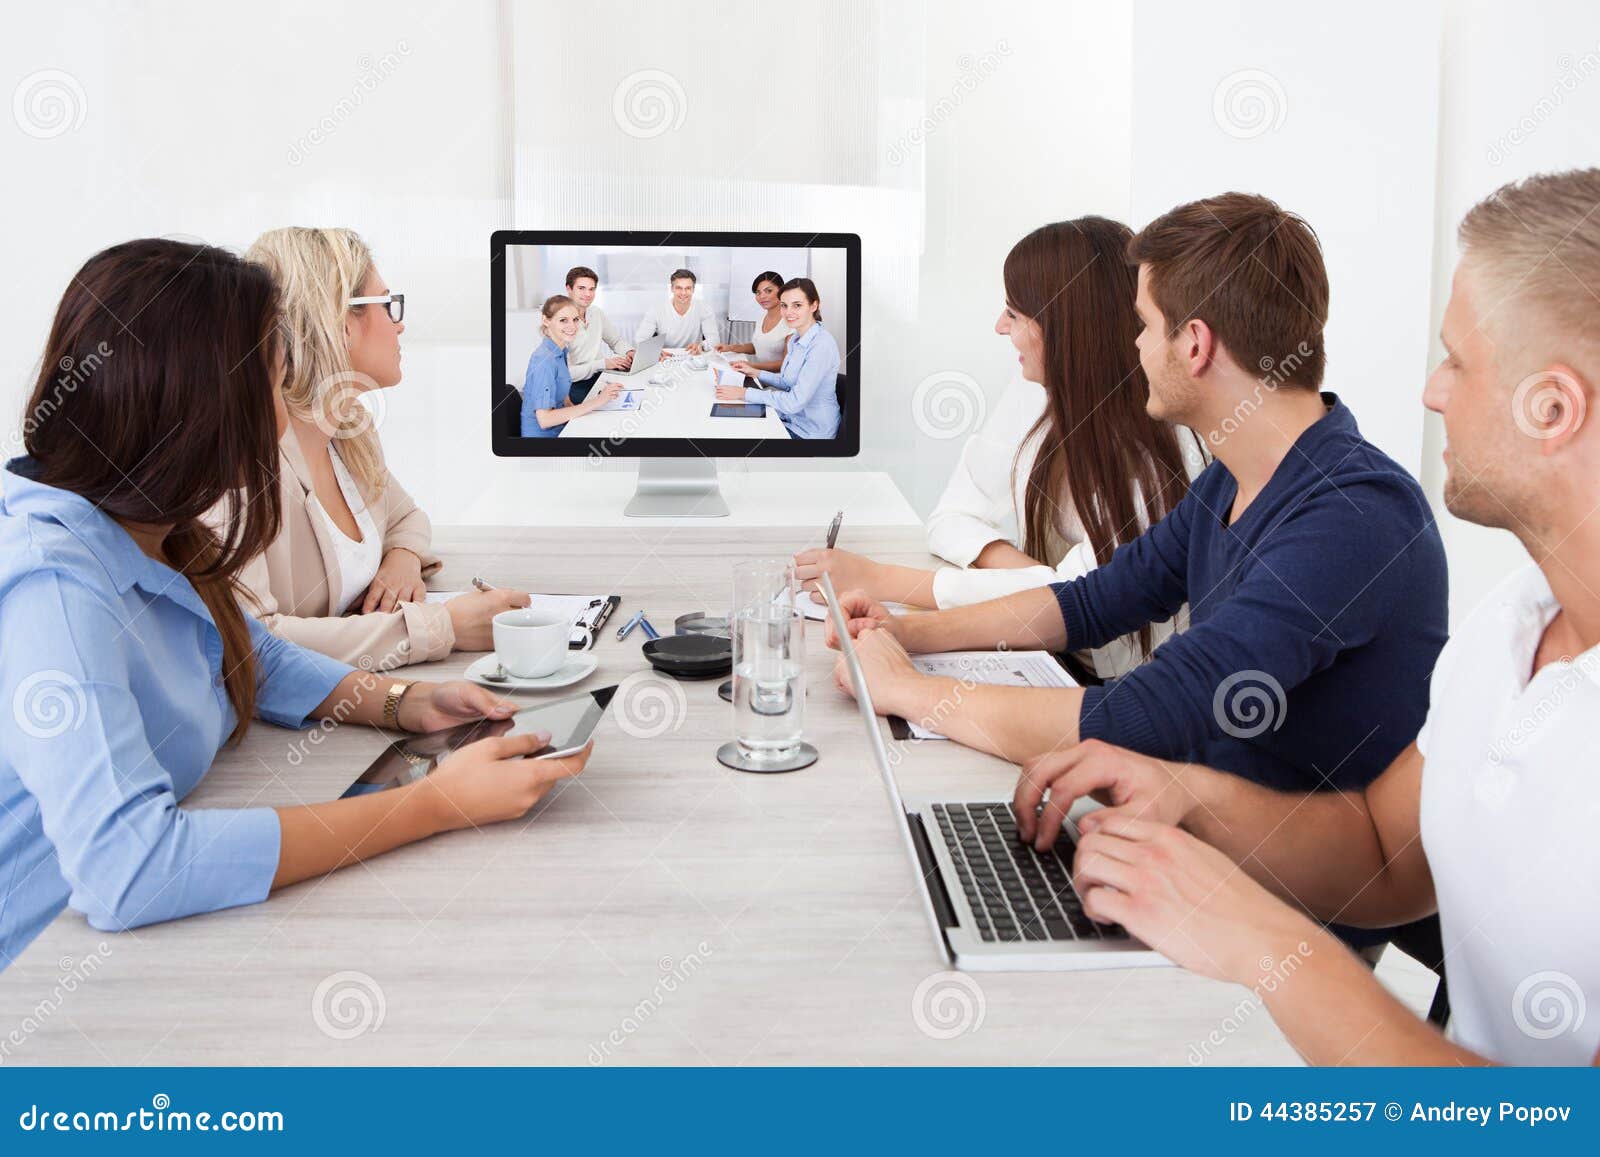 business team attending video conference